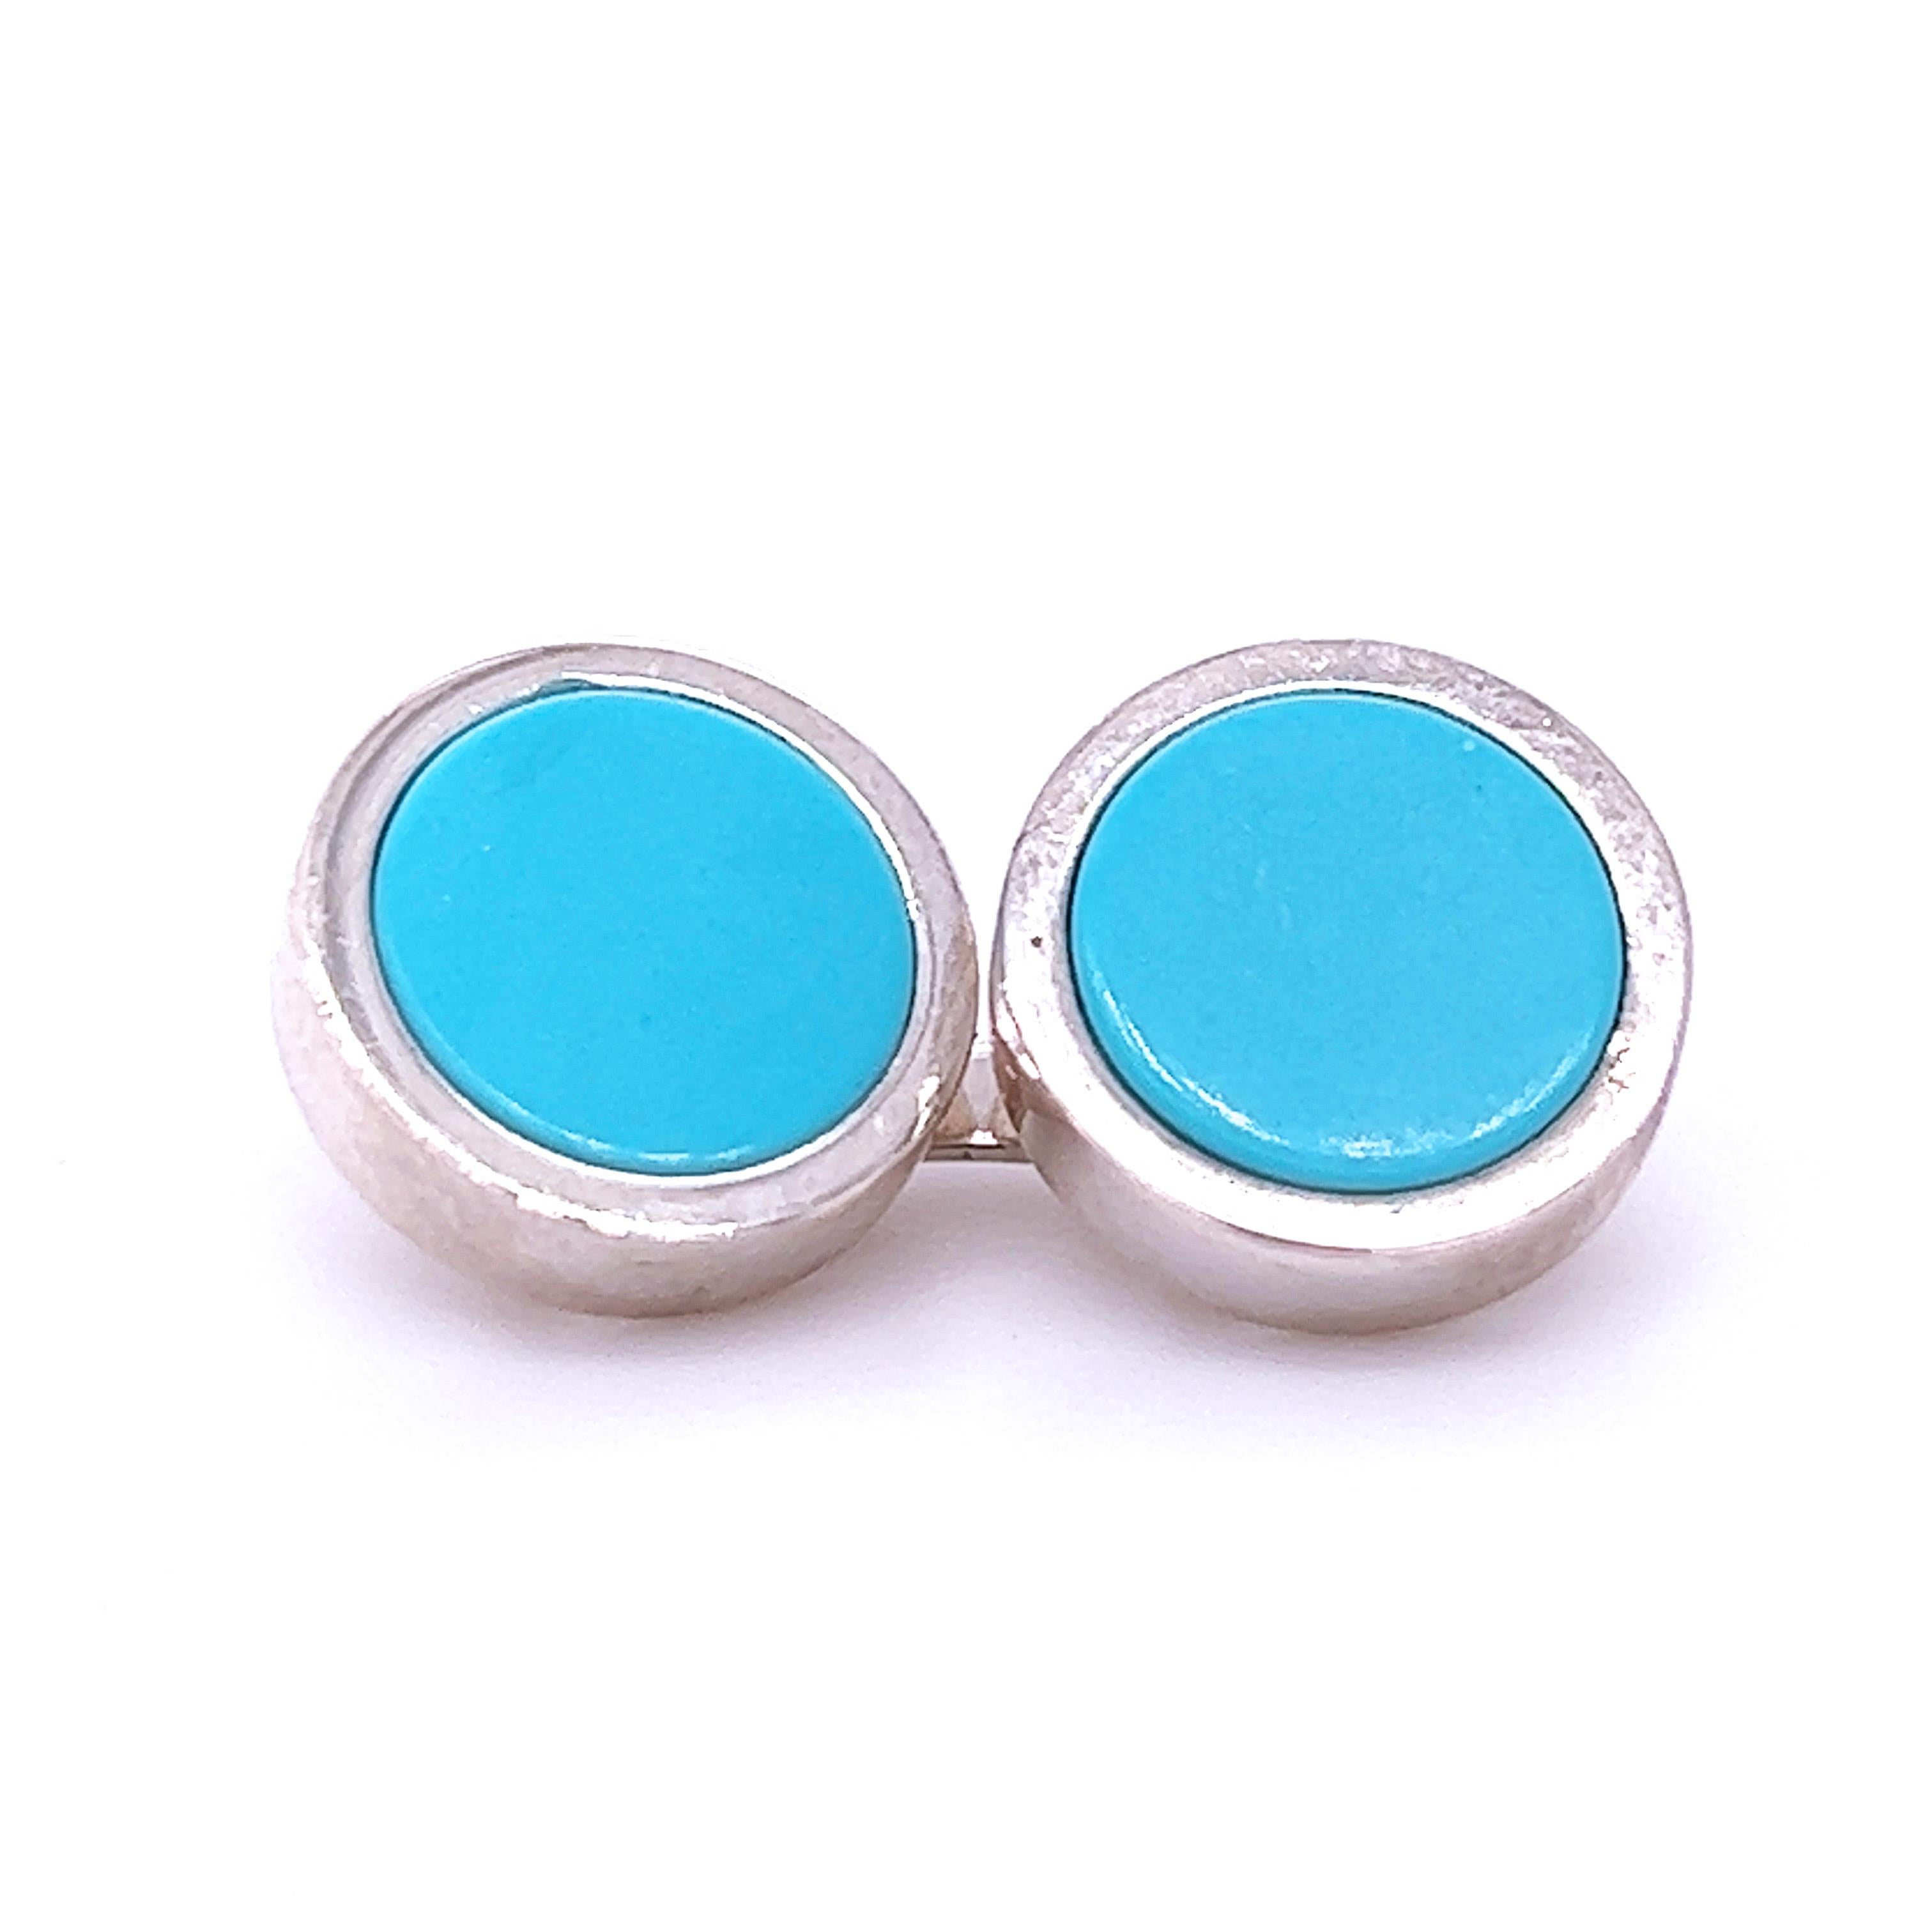 Chic and Timeless, Natural Hand Inlaid Natural Turquoise Disk Round Shaped Sterling Silver Cufflinks.
In our smart fitted Tobacco Suede Leather Case and Pouch.

